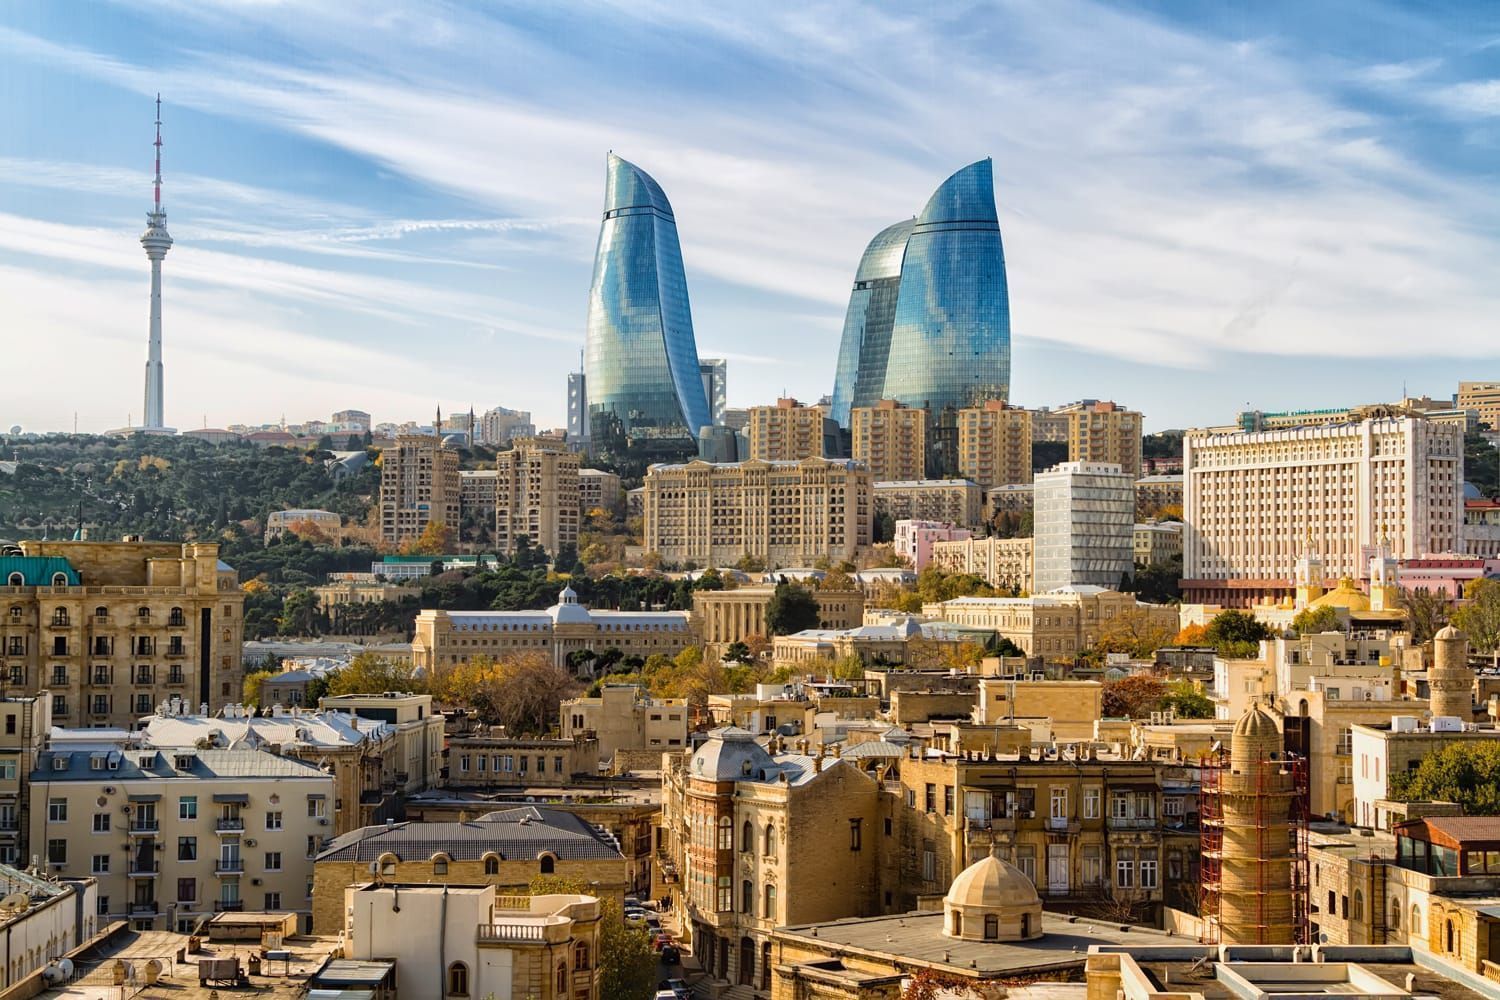 Azerbaijan ranked second in public development rating among CIS countries